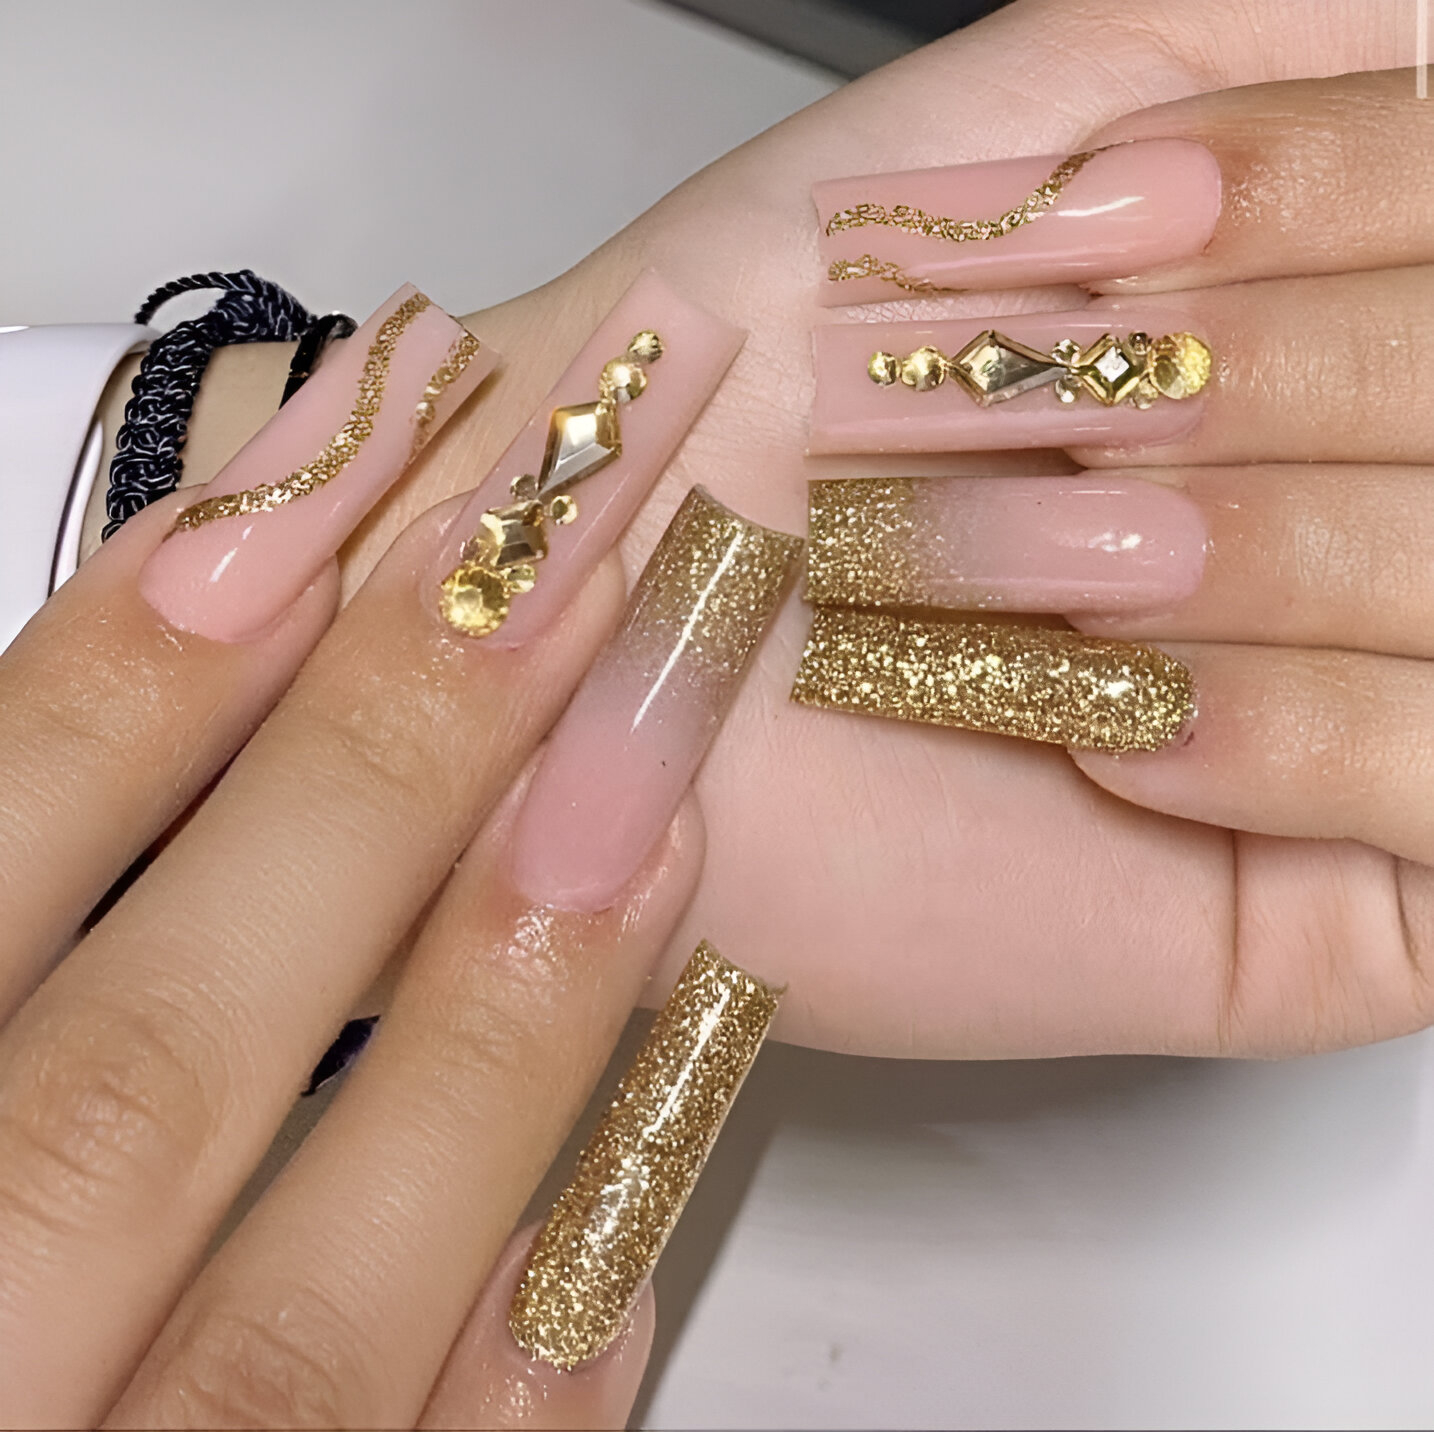 27 Stunning Coffin Nails Too Gorgeous To Ignore